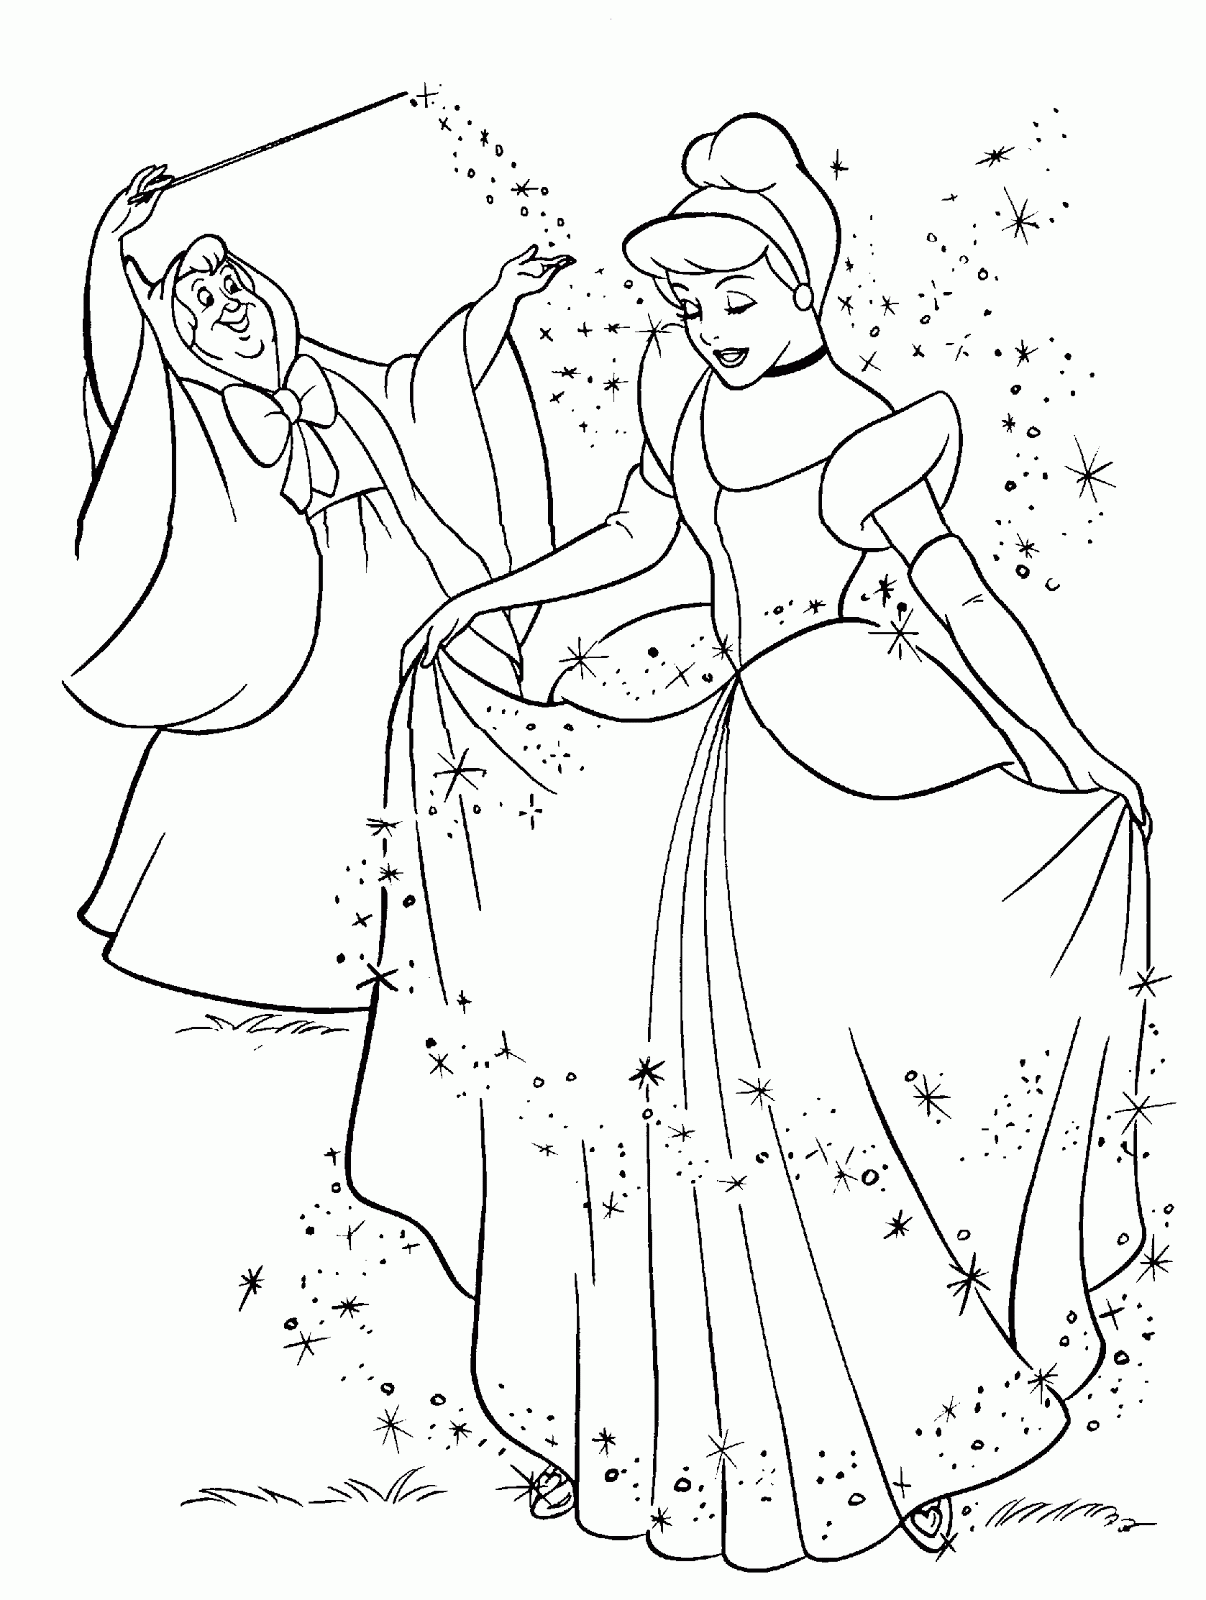 cinderella coloring pages free disney coloring pictures for kids december 2015 pages free cinderella coloring 